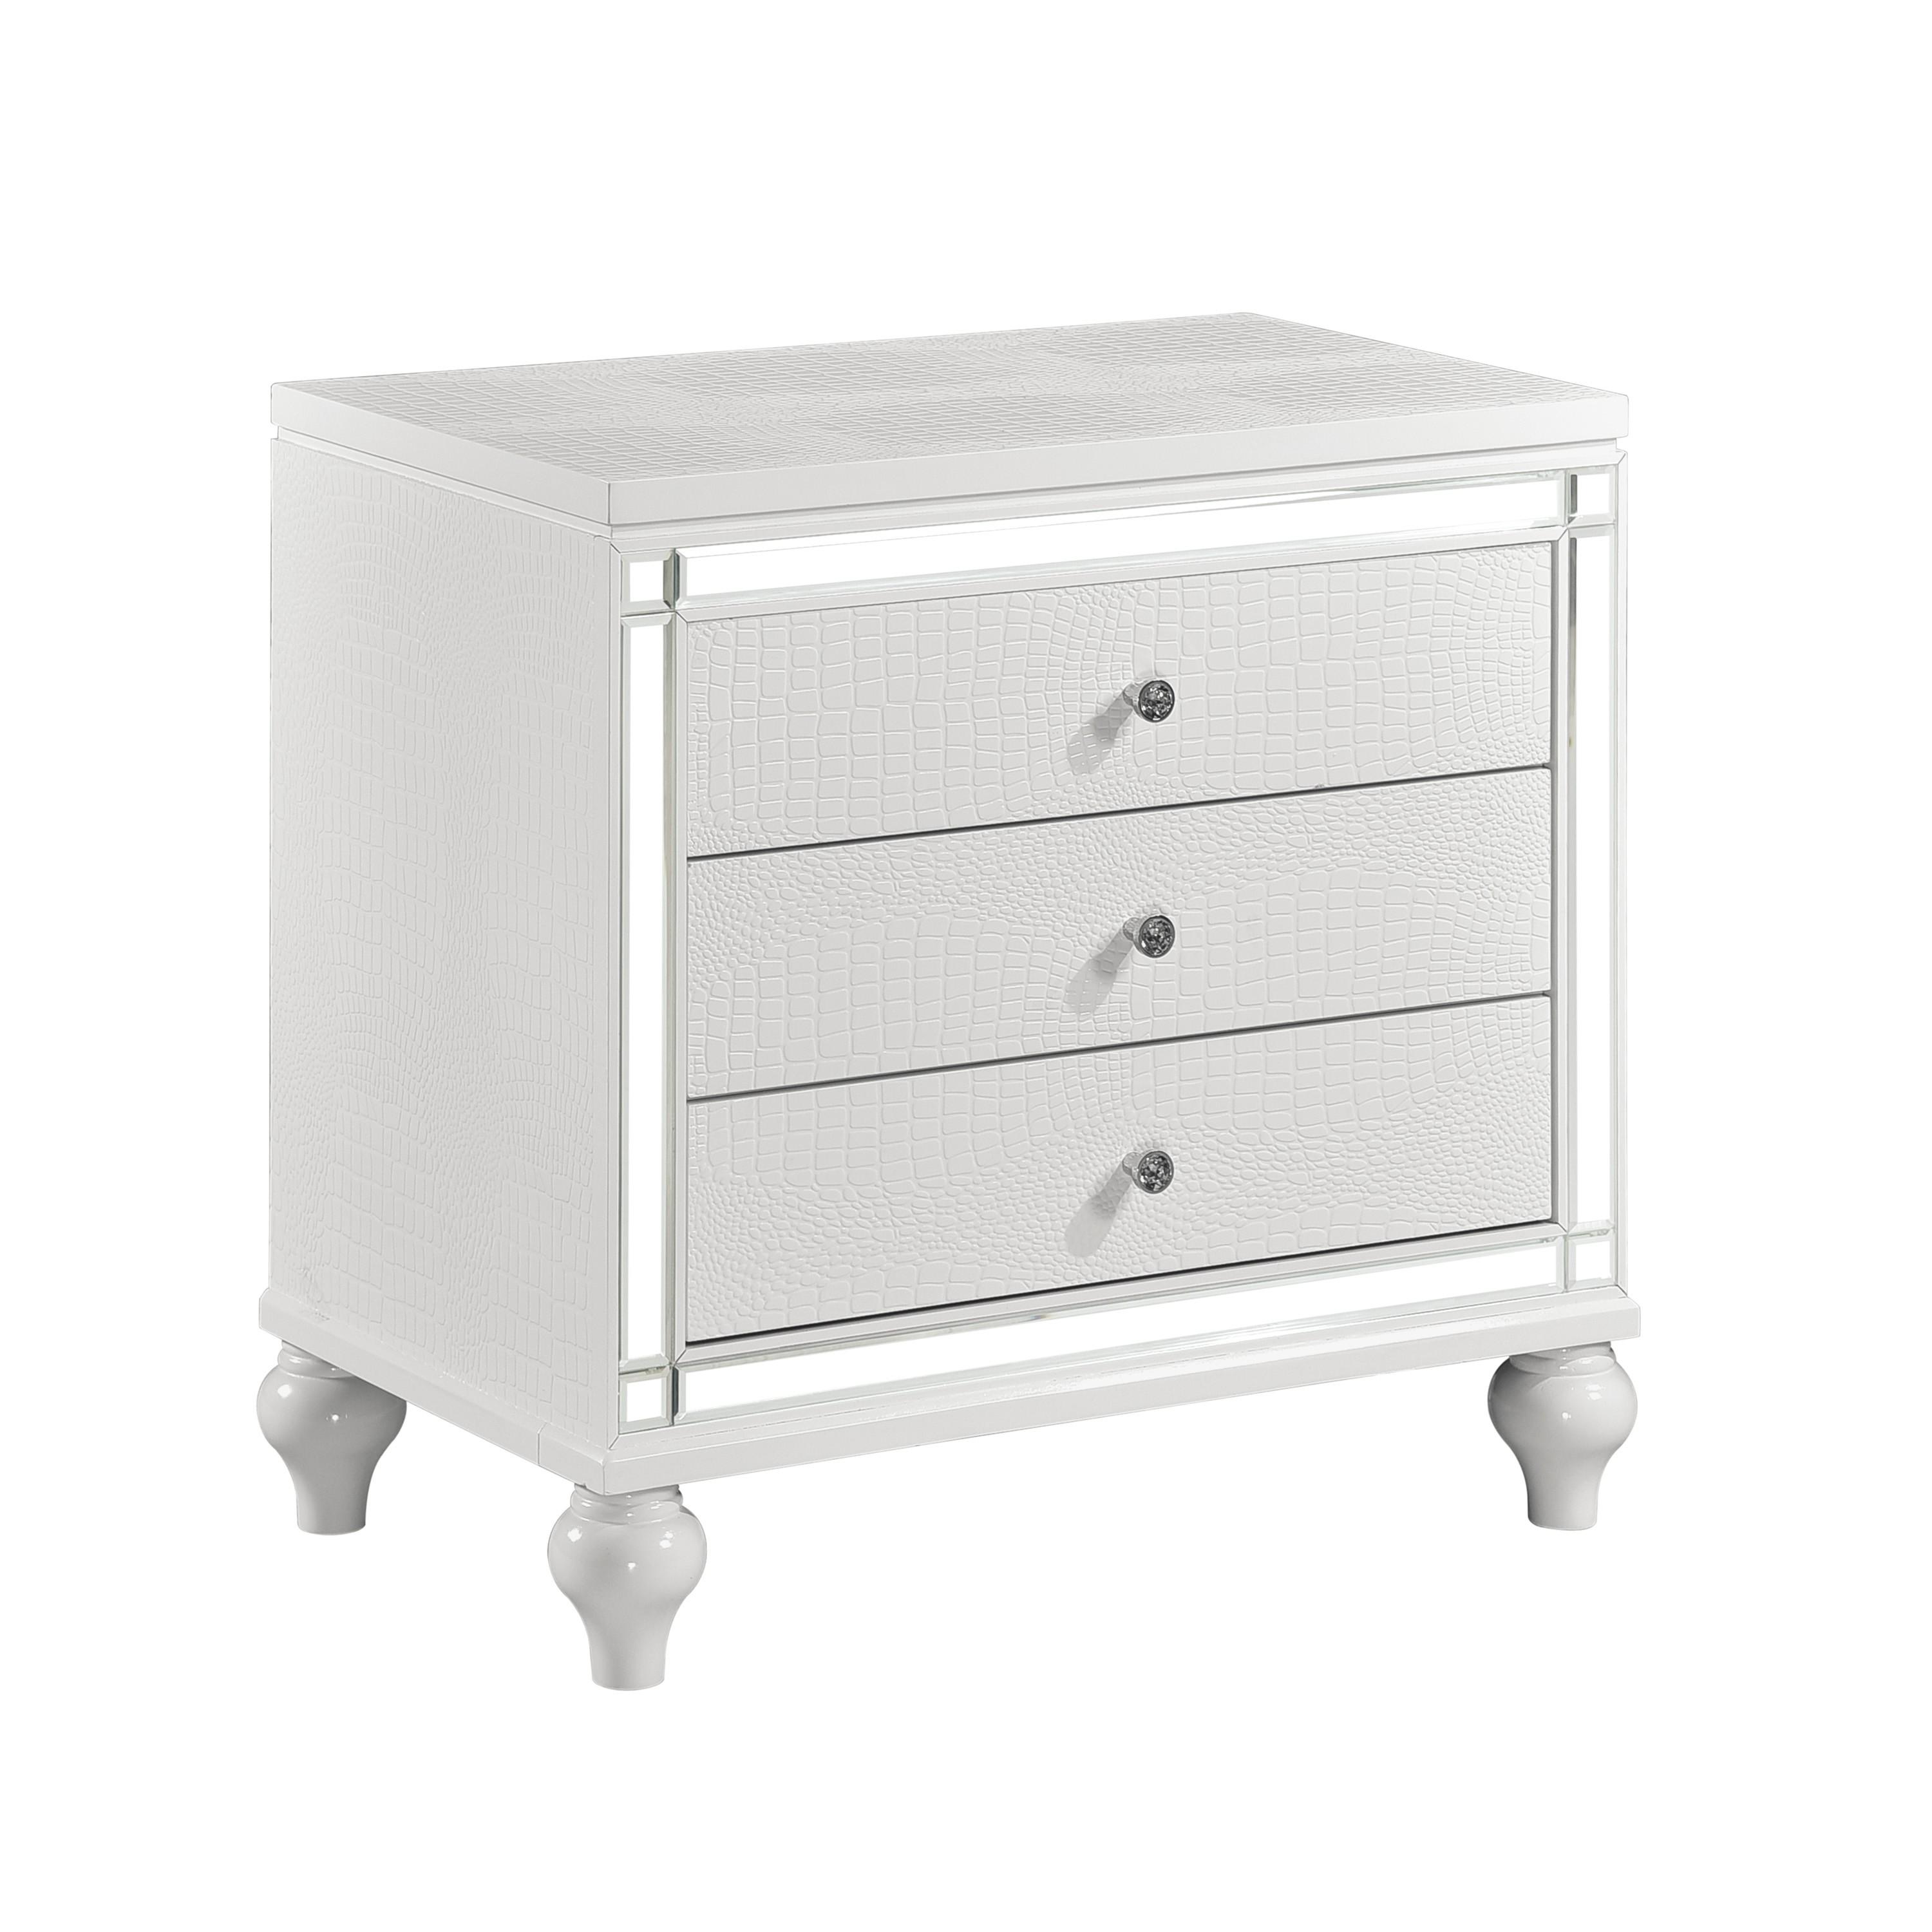 Modern Nightstand 1845-4 Alonza 1845-4 in White Faux Leather